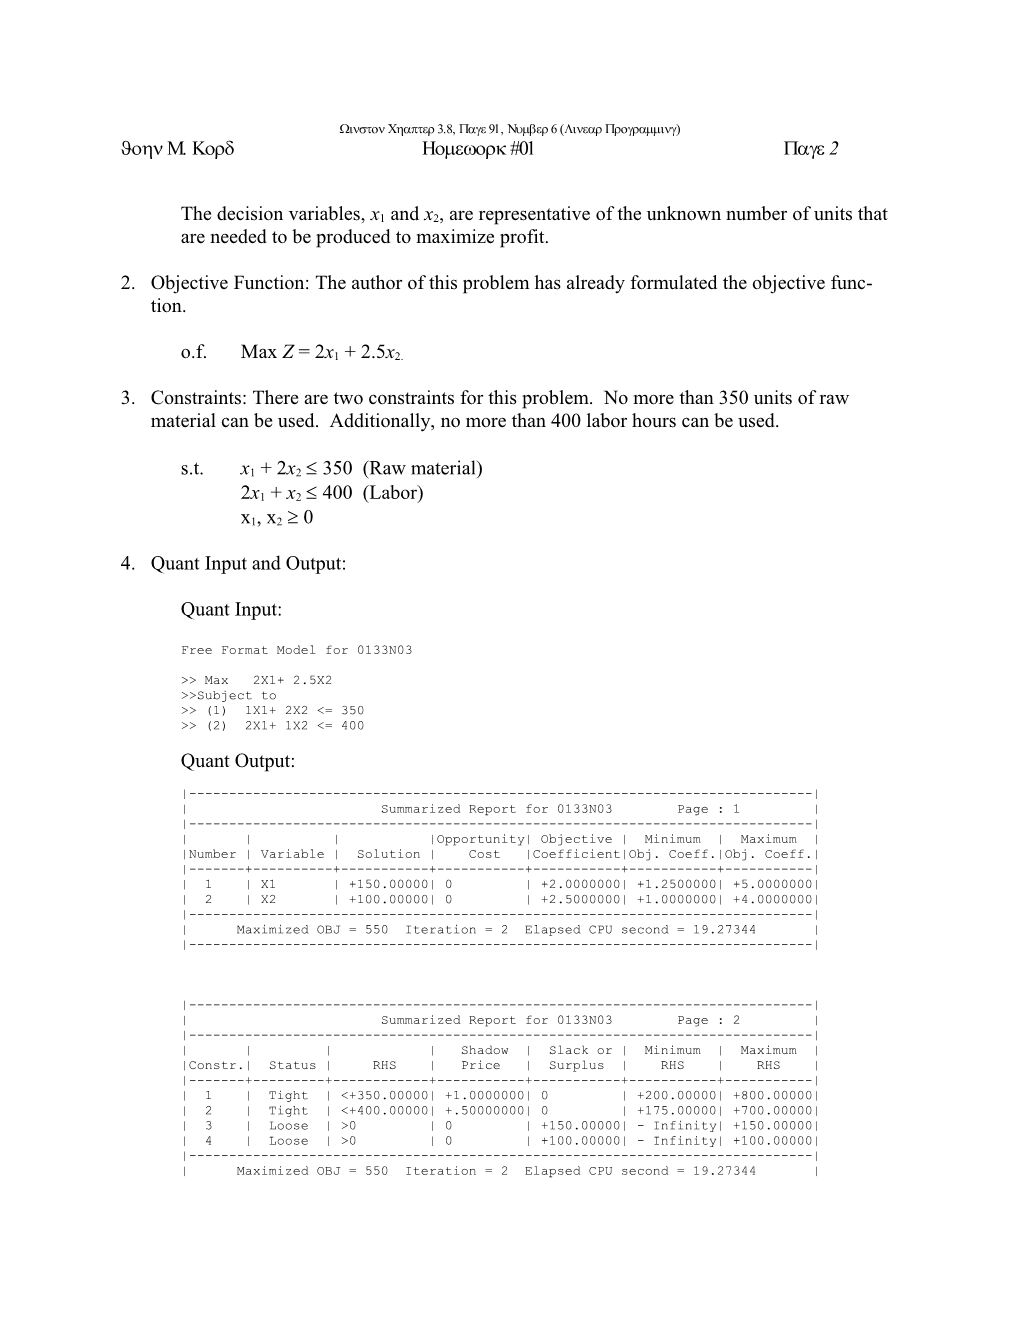 Winston Chapter 4.2, Page 133, Number 3 (Linear Programming)